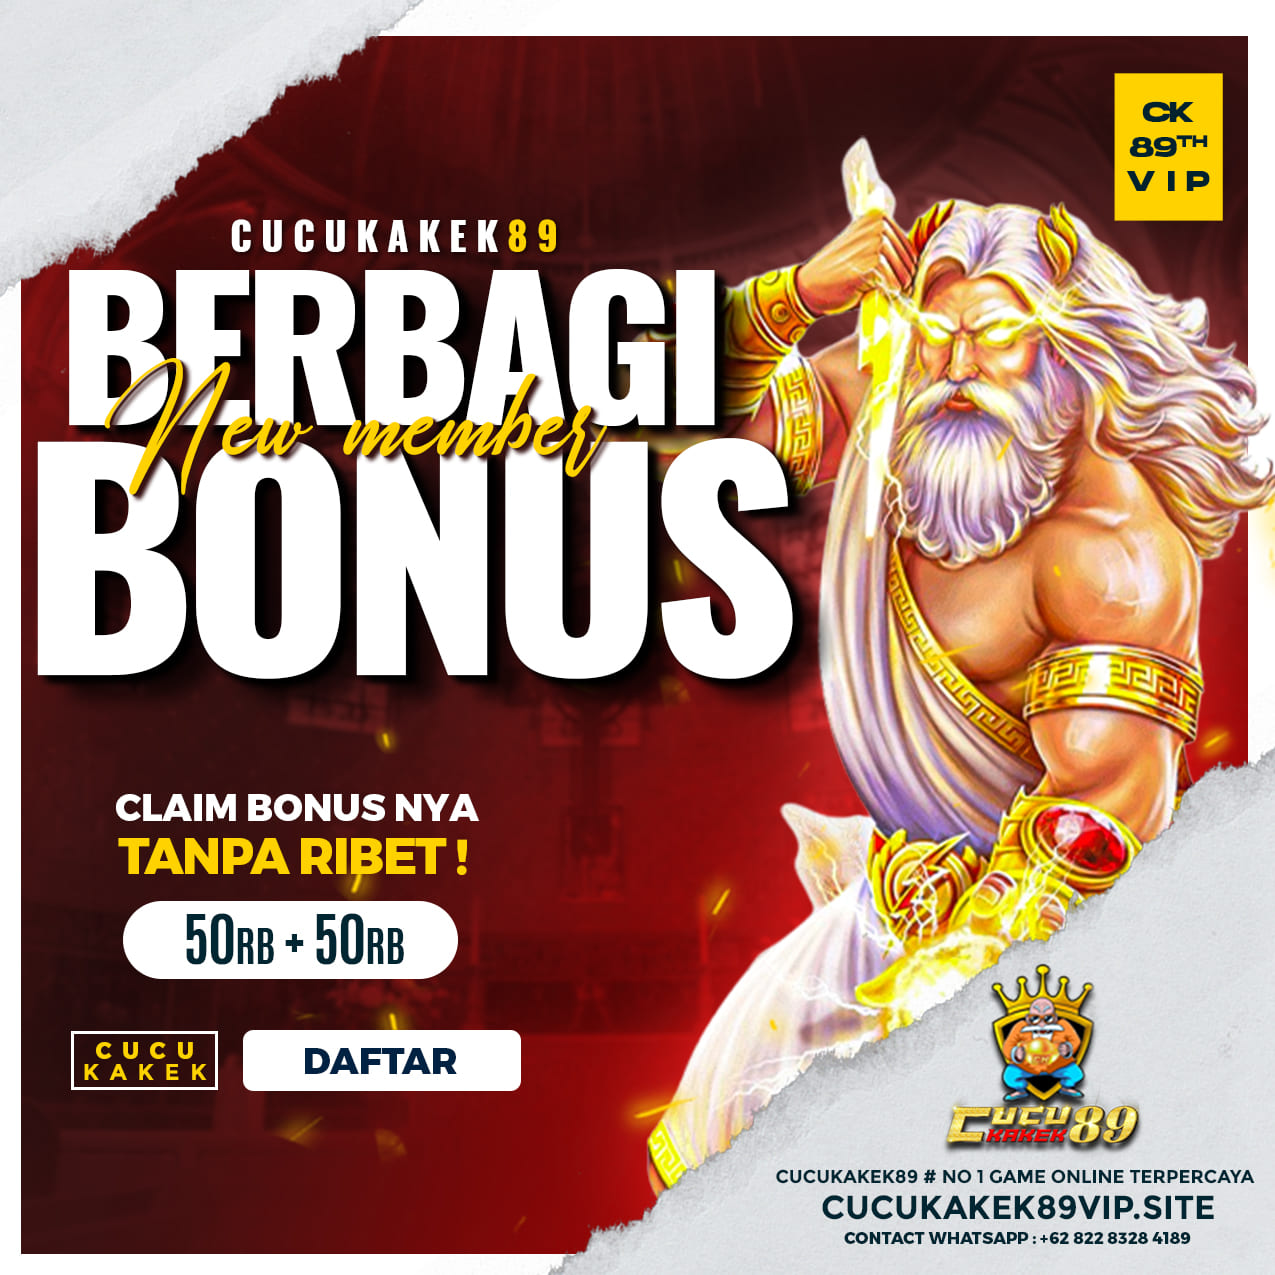 CUCUKAKEK89 -The Best Online Slot Game Website With Credit Without Deductions